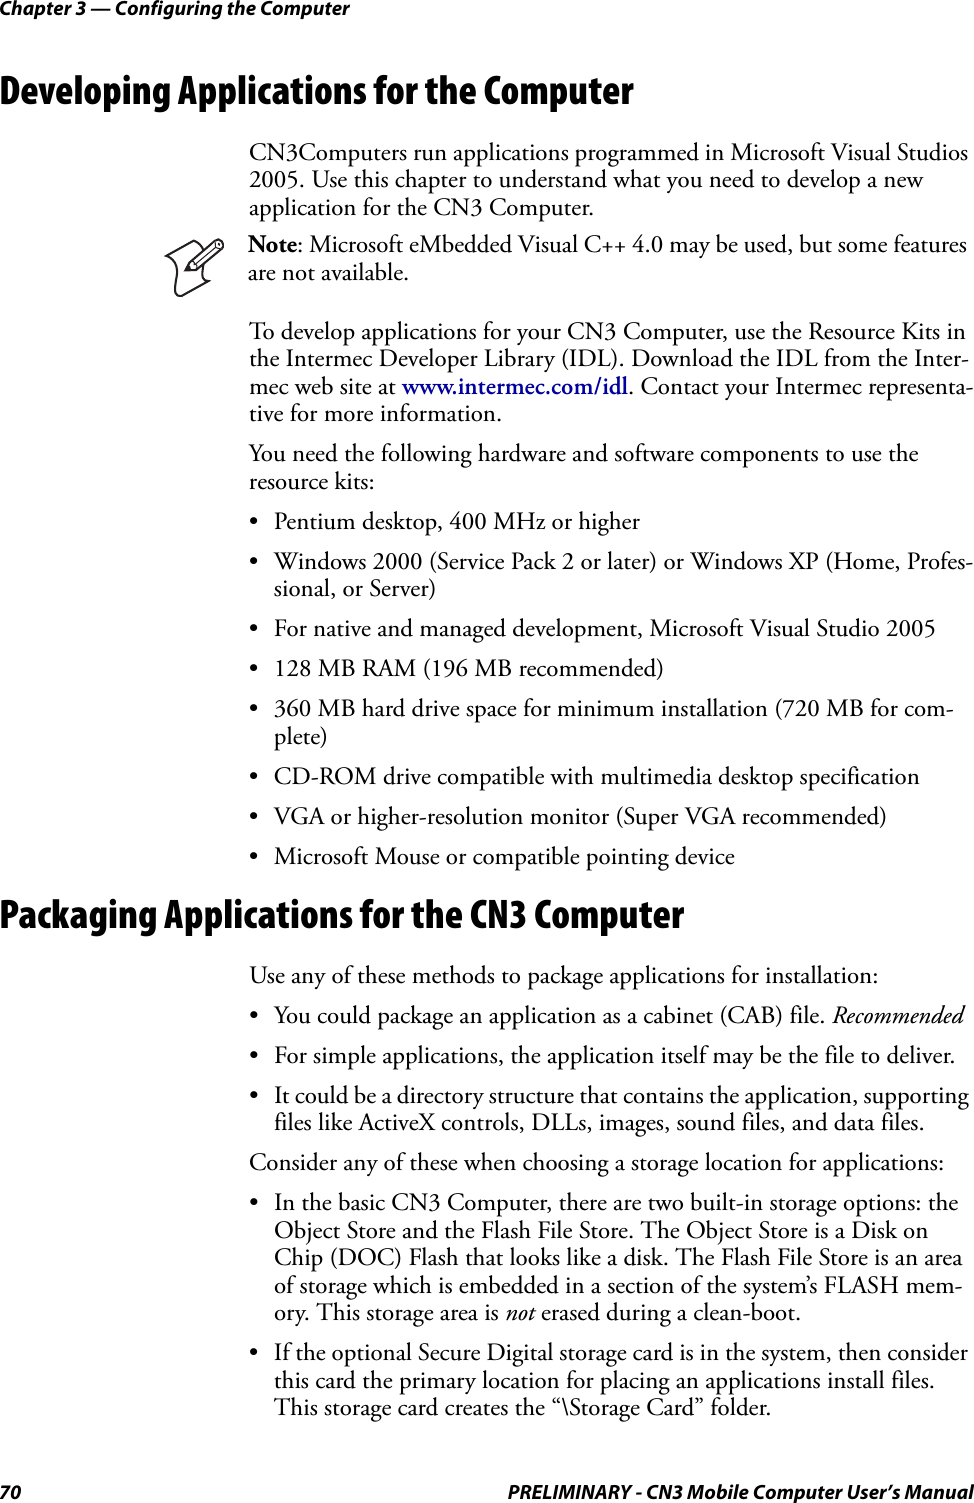 Chapter 3 — Configuring the Computer70 PRELIMINARY - CN3 Mobile Computer User’s ManualDeveloping Applications for the ComputerCN3Computers run applications programmed in Microsoft Visual Studios 2005. Use this chapter to understand what you need to develop a new application for the CN3 Computer.To develop applications for your CN3 Computer, use the Resource Kits in the Intermec Developer Library (IDL). Download the IDL from the Inter-mec web site at www.intermec.com/idl. Contact your Intermec representa-tive for more information.You need the following hardware and software components to use the resource kits:• Pentium desktop, 400 MHz or higher• Windows 2000 (Service Pack 2 or later) or Windows XP (Home, Profes-sional, or Server)• For native and managed development, Microsoft Visual Studio 2005• 128 MB RAM (196 MB recommended)• 360 MB hard drive space for minimum installation (720 MB for com-plete)• CD-ROM drive compatible with multimedia desktop specification• VGA or higher-resolution monitor (Super VGA recommended)• Microsoft Mouse or compatible pointing devicePackaging Applications for the CN3 ComputerUse any of these methods to package applications for installation:• You could package an application as a cabinet (CAB) file. Recommended• For simple applications, the application itself may be the file to deliver.• It could be a directory structure that contains the application, supporting files like ActiveX controls, DLLs, images, sound files, and data files.Consider any of these when choosing a storage location for applications:• In the basic CN3 Computer, there are two built-in storage options: the Object Store and the Flash File Store. The Object Store is a Disk on Chip (DOC) Flash that looks like a disk. The Flash File Store is an area of storage which is embedded in a section of the system’s FLASH mem-ory. This storage area is not erased during a clean-boot.• If the optional Secure Digital storage card is in the system, then consider this card the primary location for placing an applications install files. This storage card creates the “\Storage Card” folder.Note: Microsoft eMbedded Visual C++ 4.0 may be used, but some features are not available.